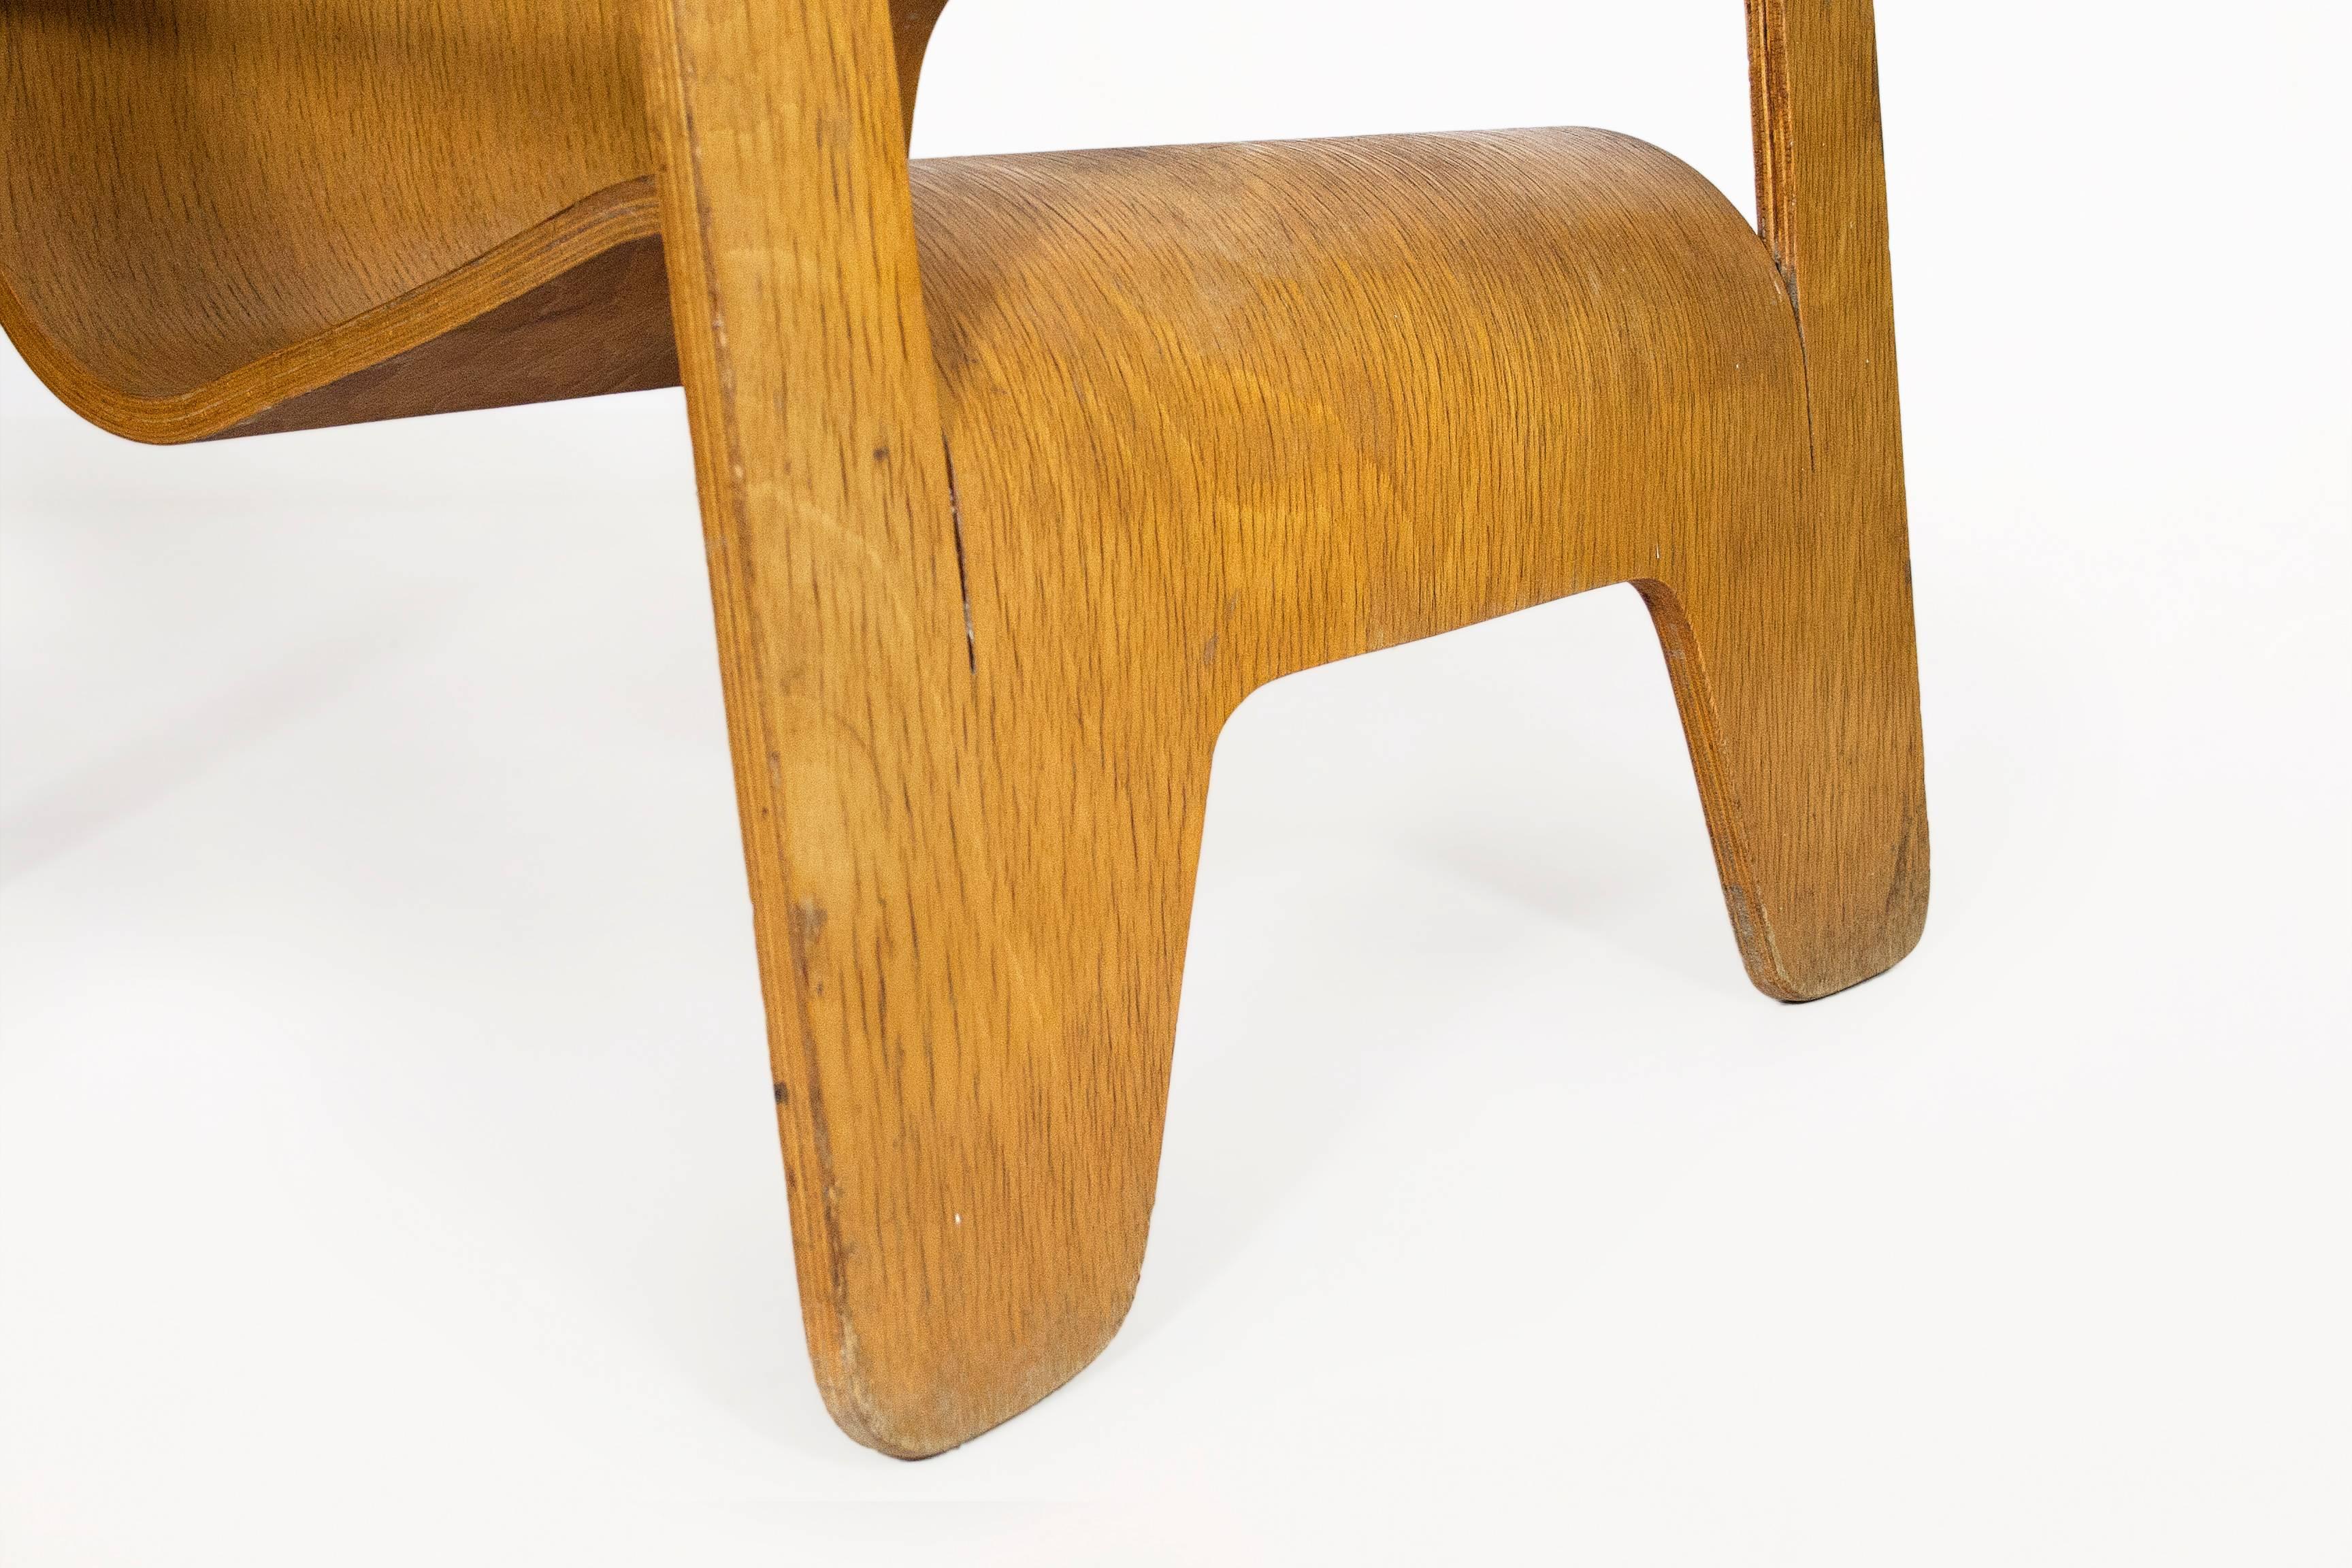 Laminated Lounge Chair by Han Pieck for Lawo Ommen, circa 1940, Netherlands